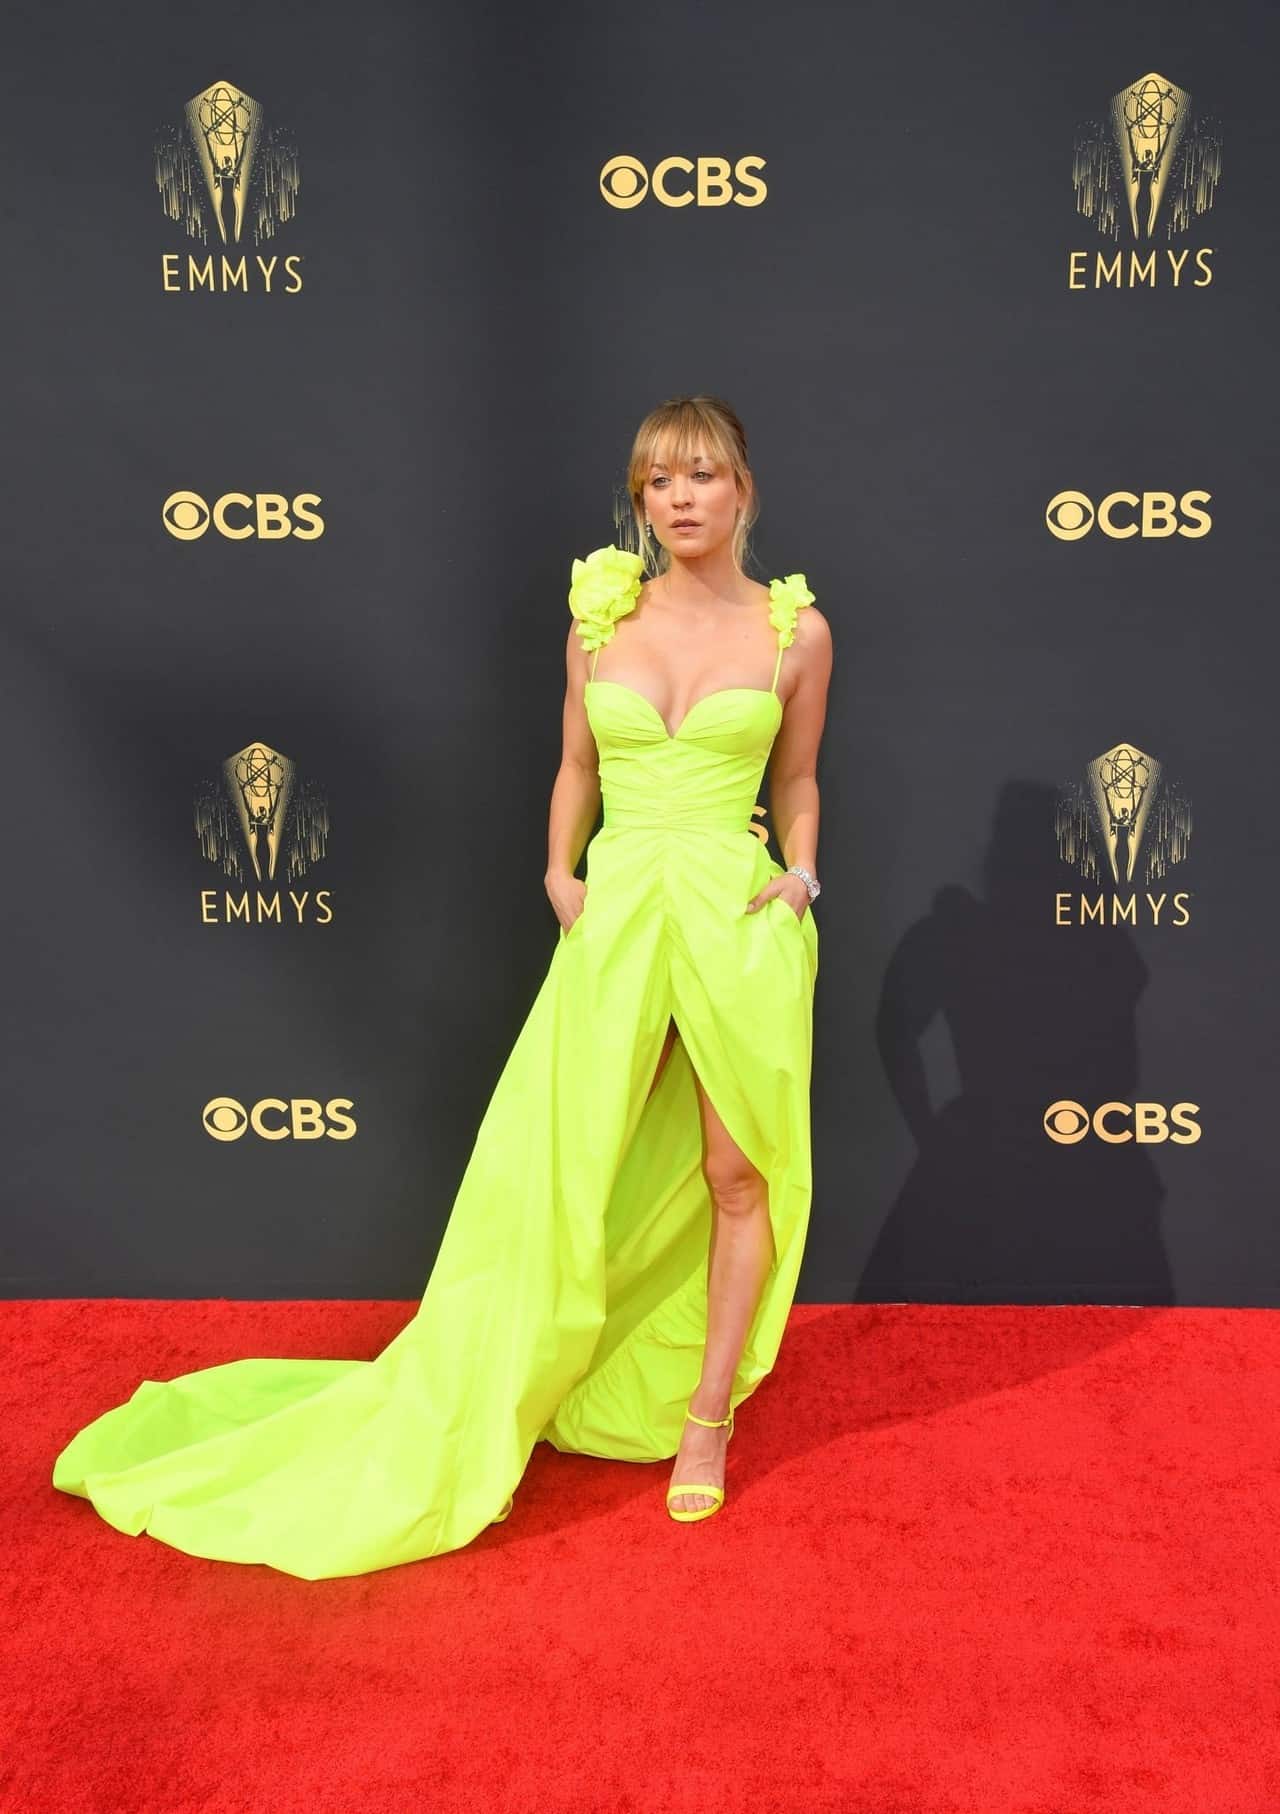 Kaley Cuoco Lit Up the Primetime Emmy Awards with Her Radiant Dress